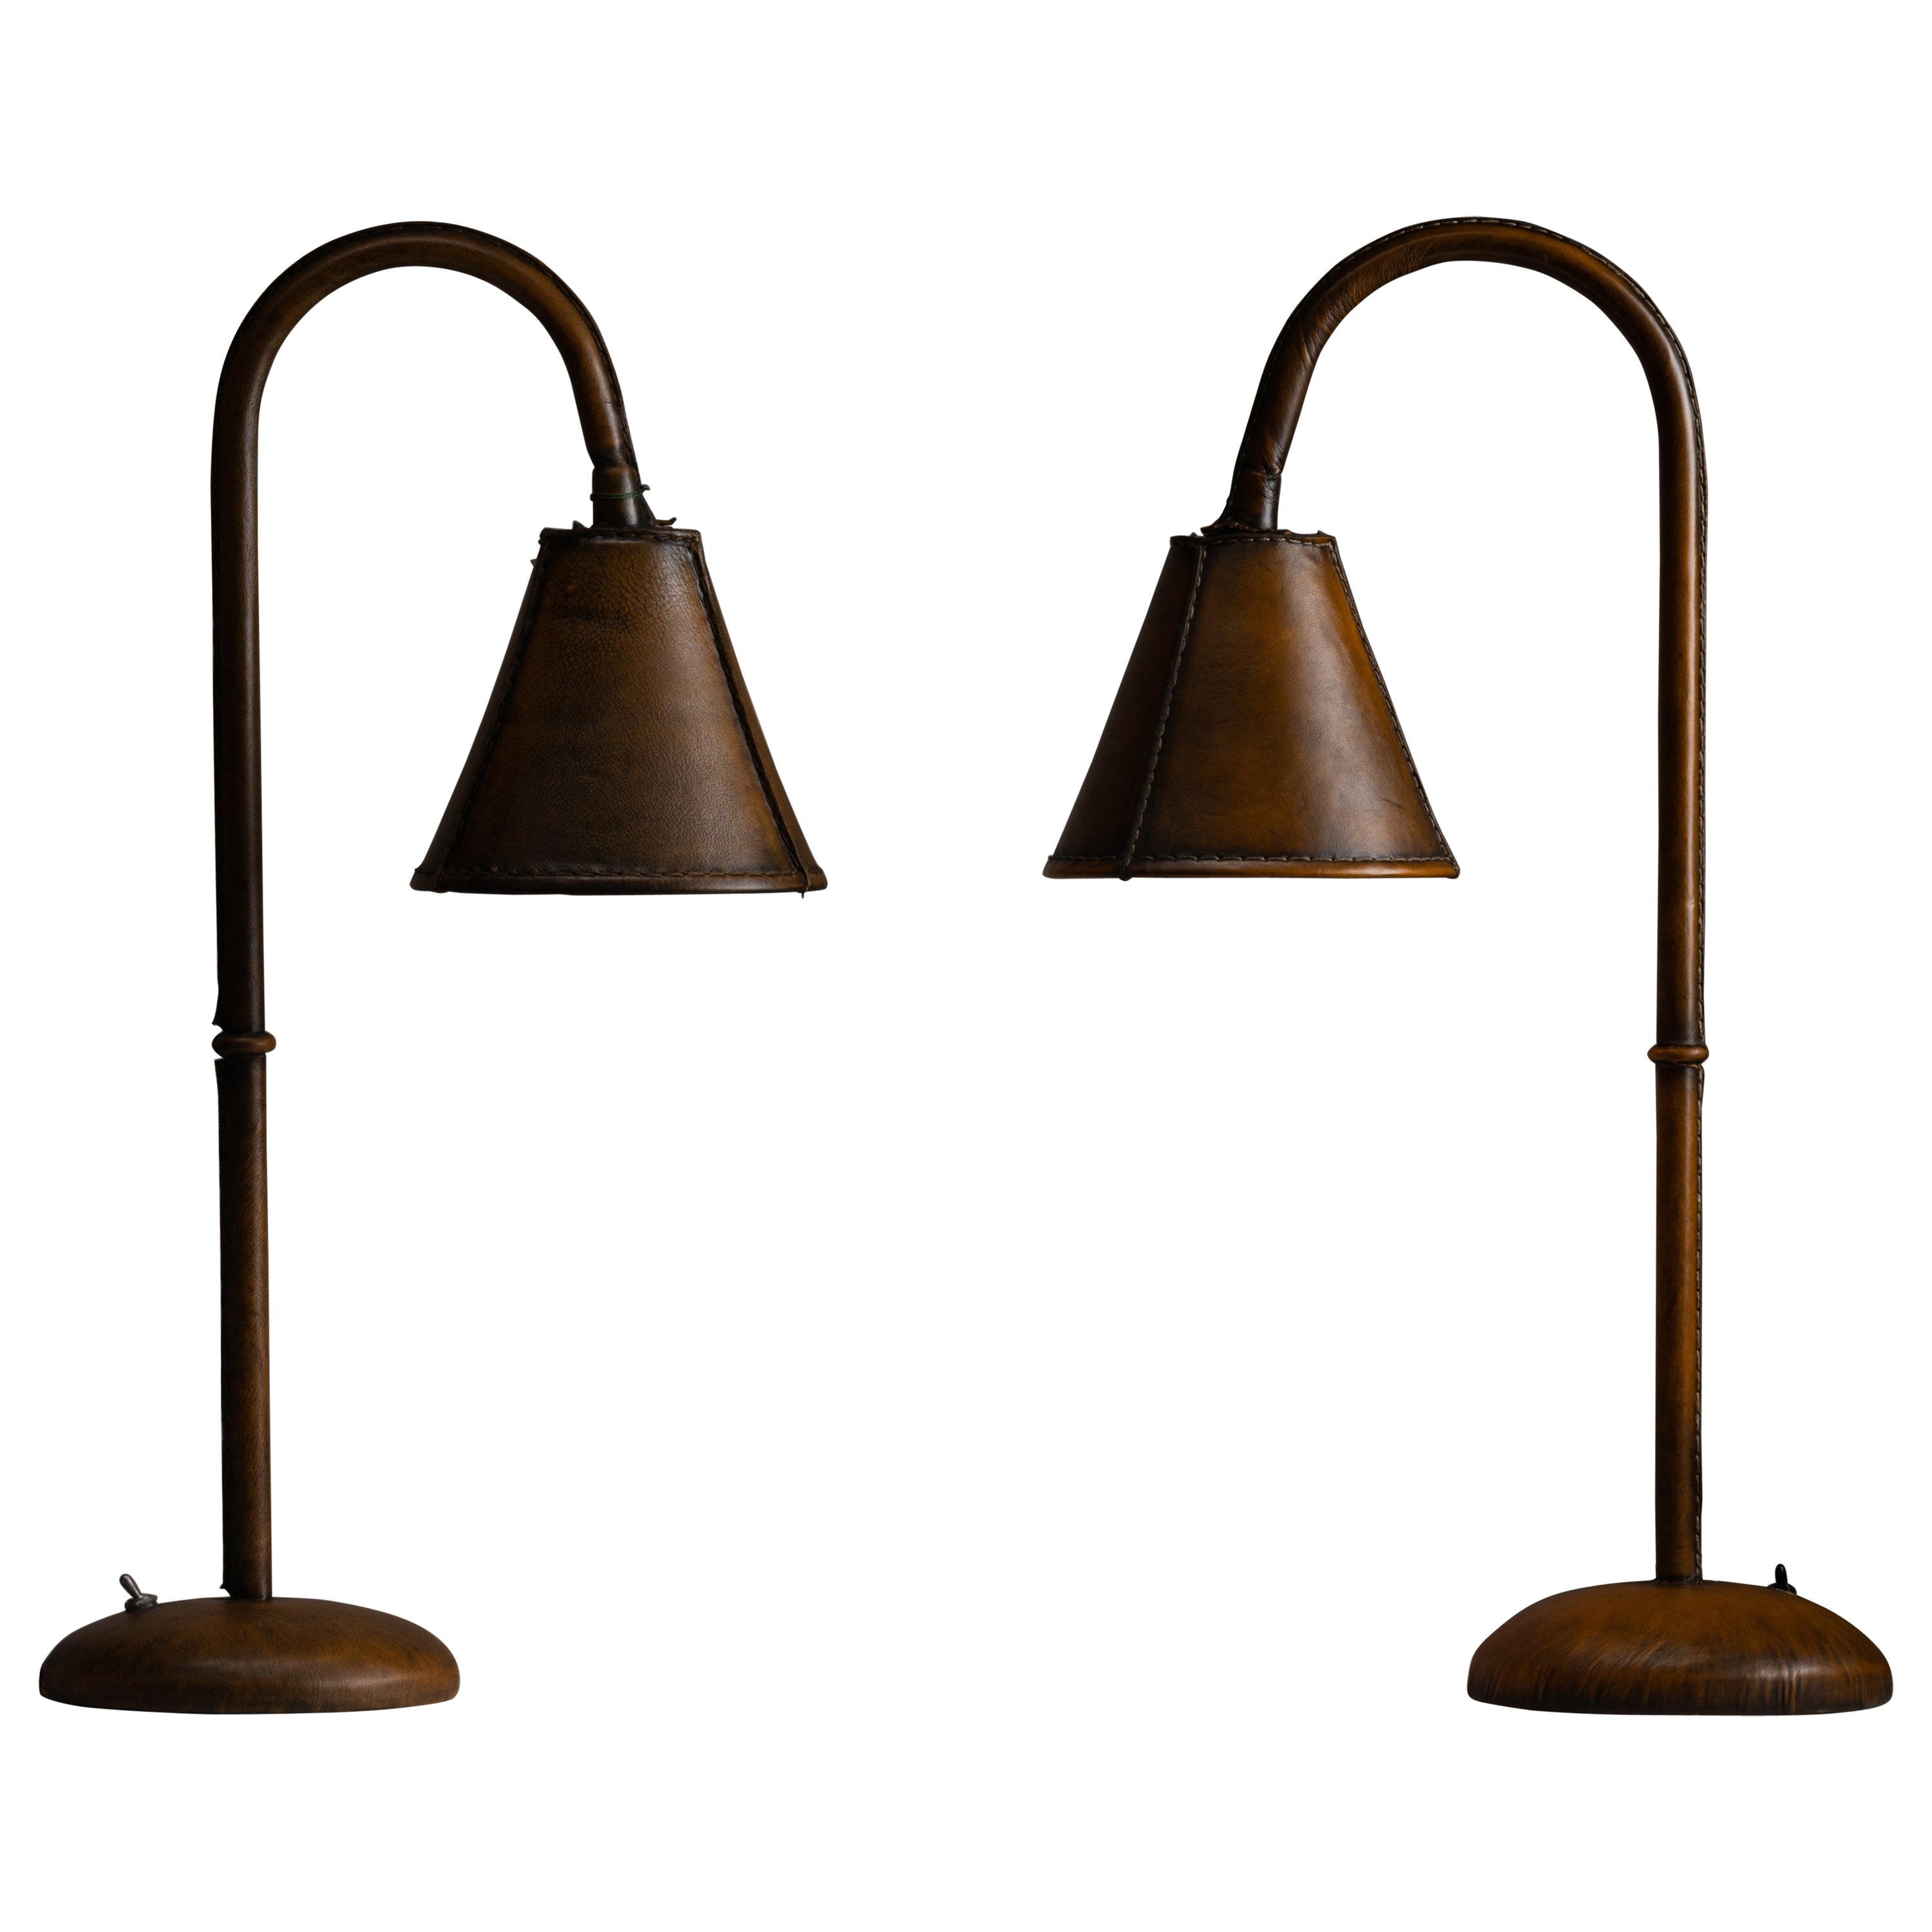 Tan Leather Table Lamps by Valenti